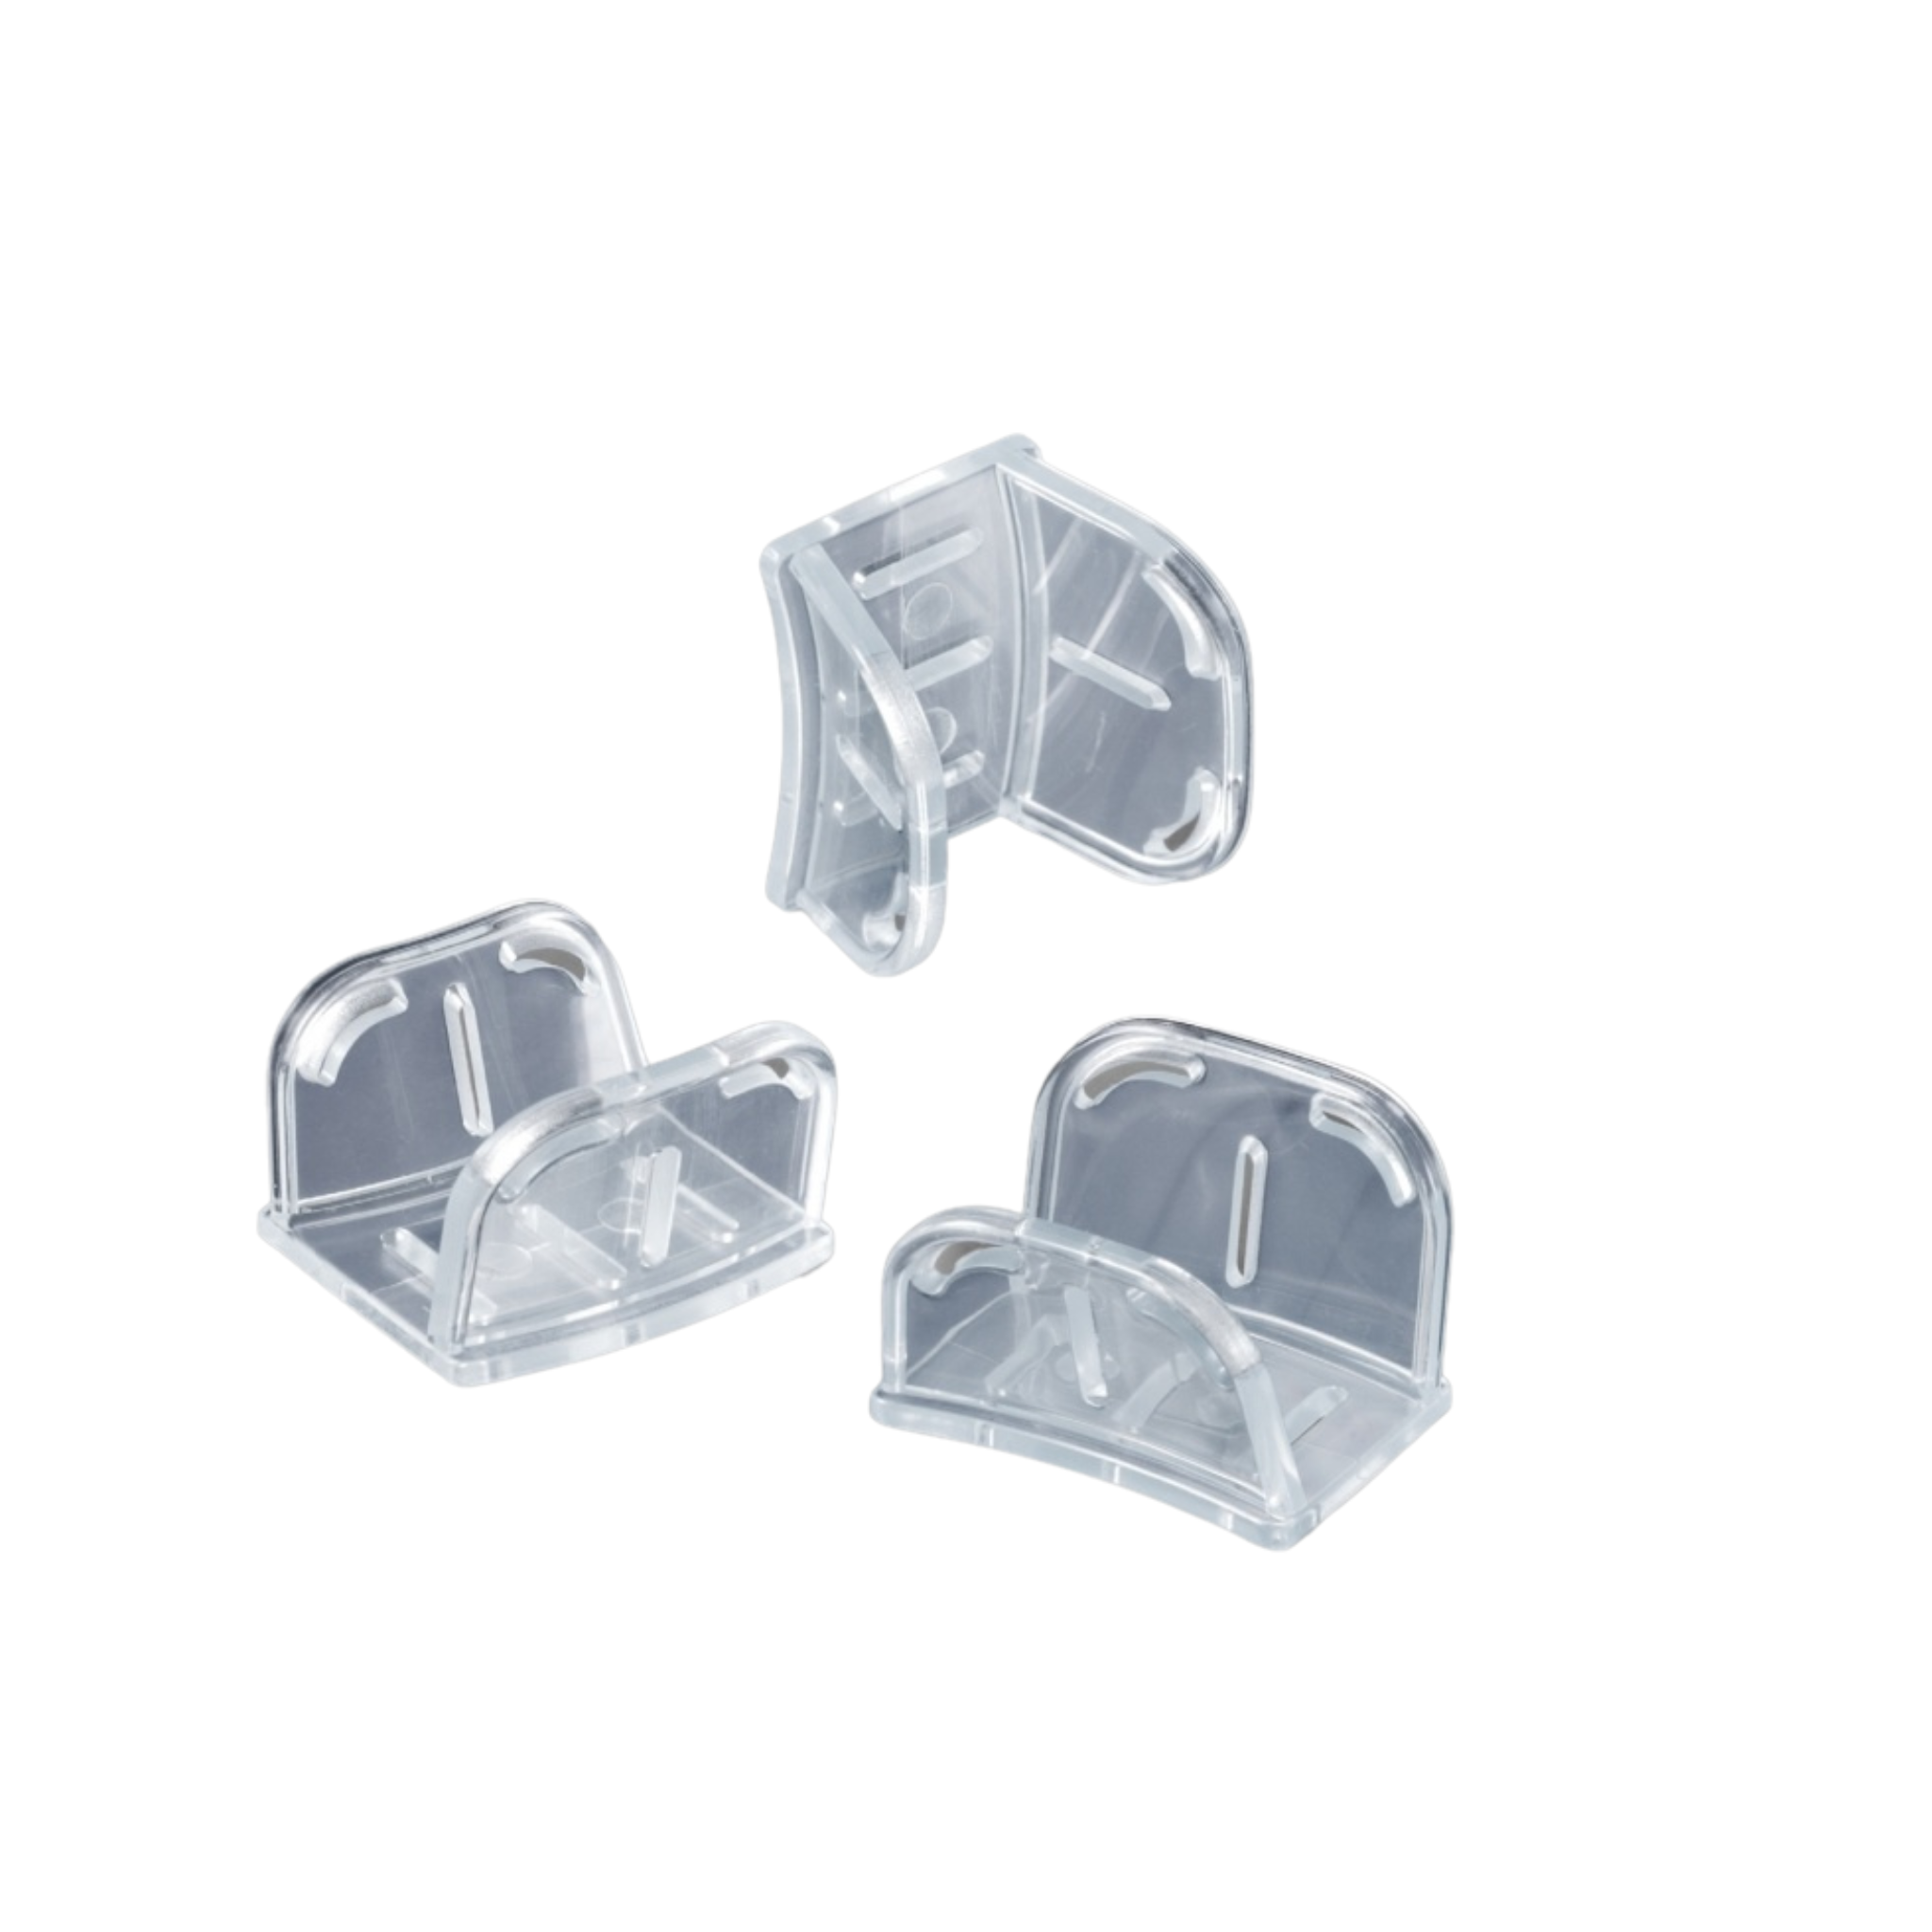 Disposable impression tray inlay<br> Perforated